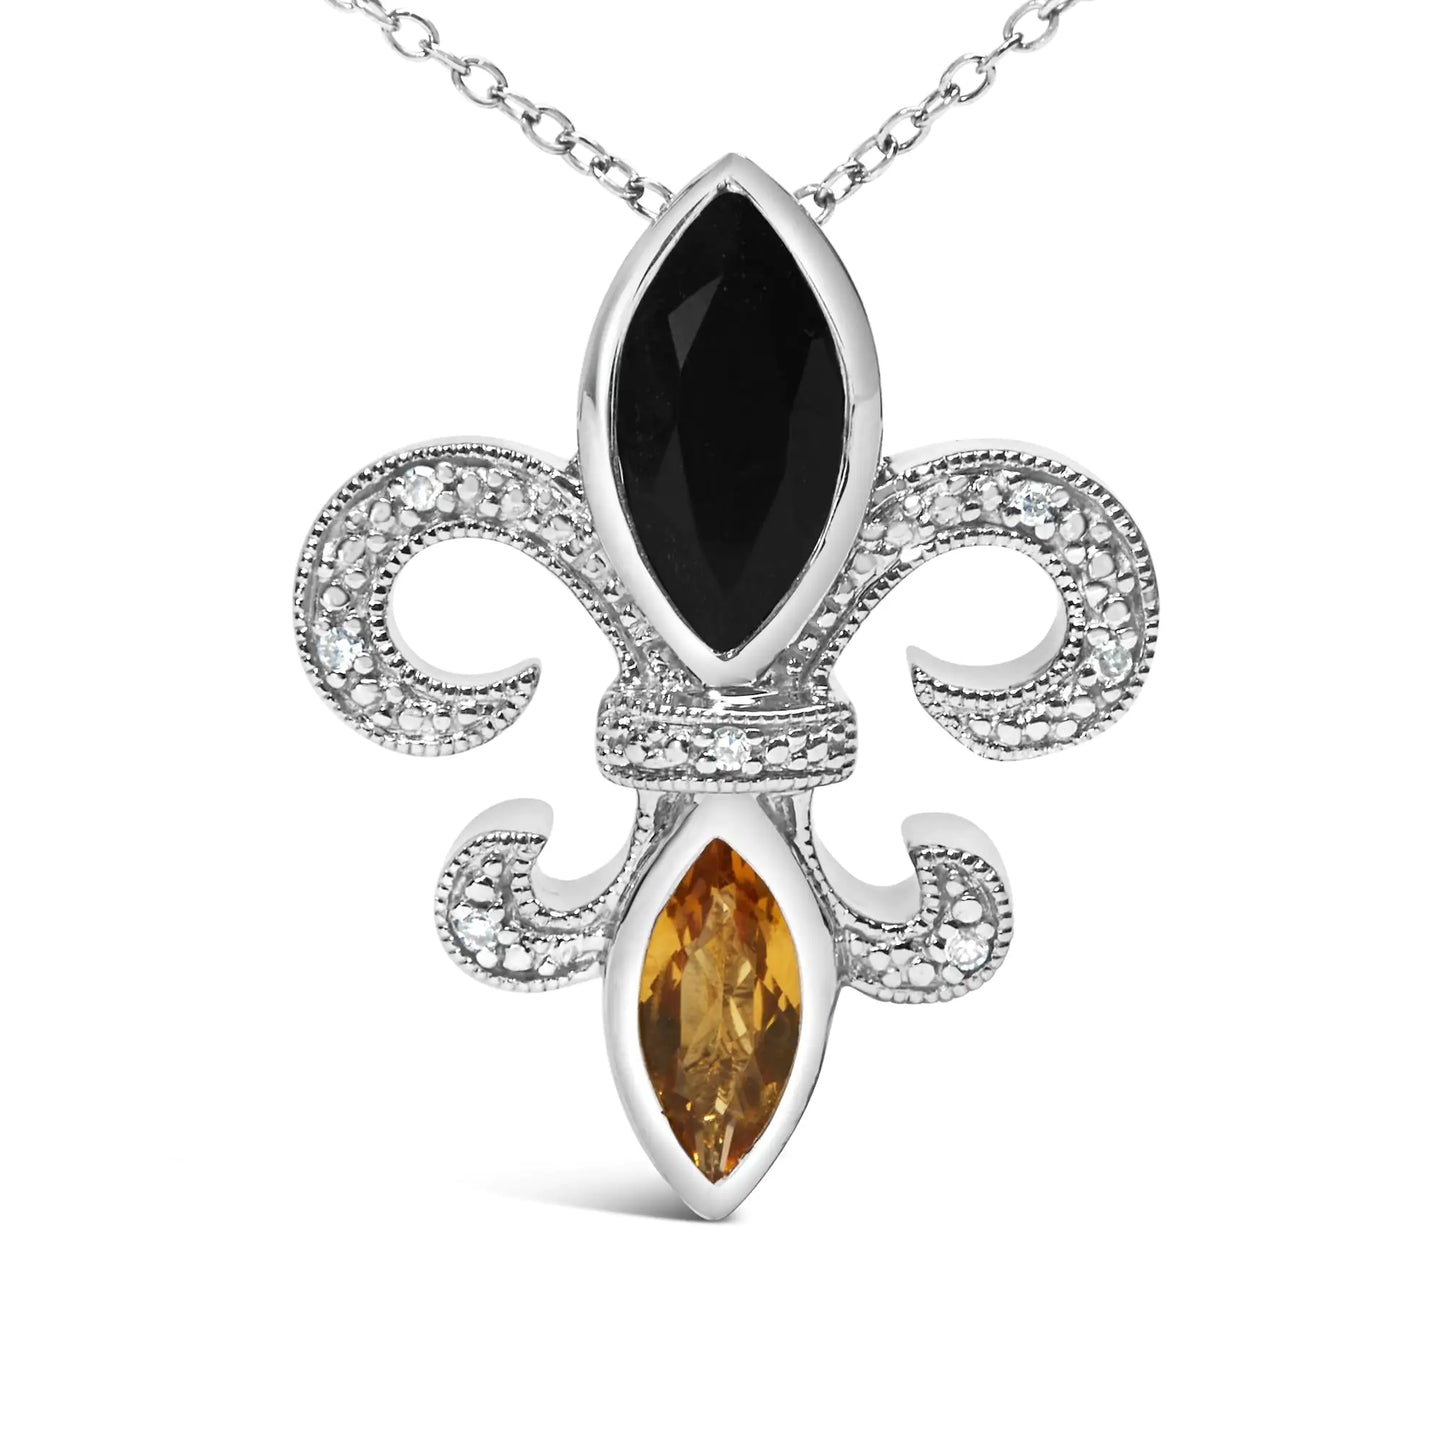 .925 Sterling Silver Marquise Onyx and Citrine and Diamond Accent Fleur De Lis Pendant Necklace (H-I Color, SI1-SI2 Clarity) - 18"